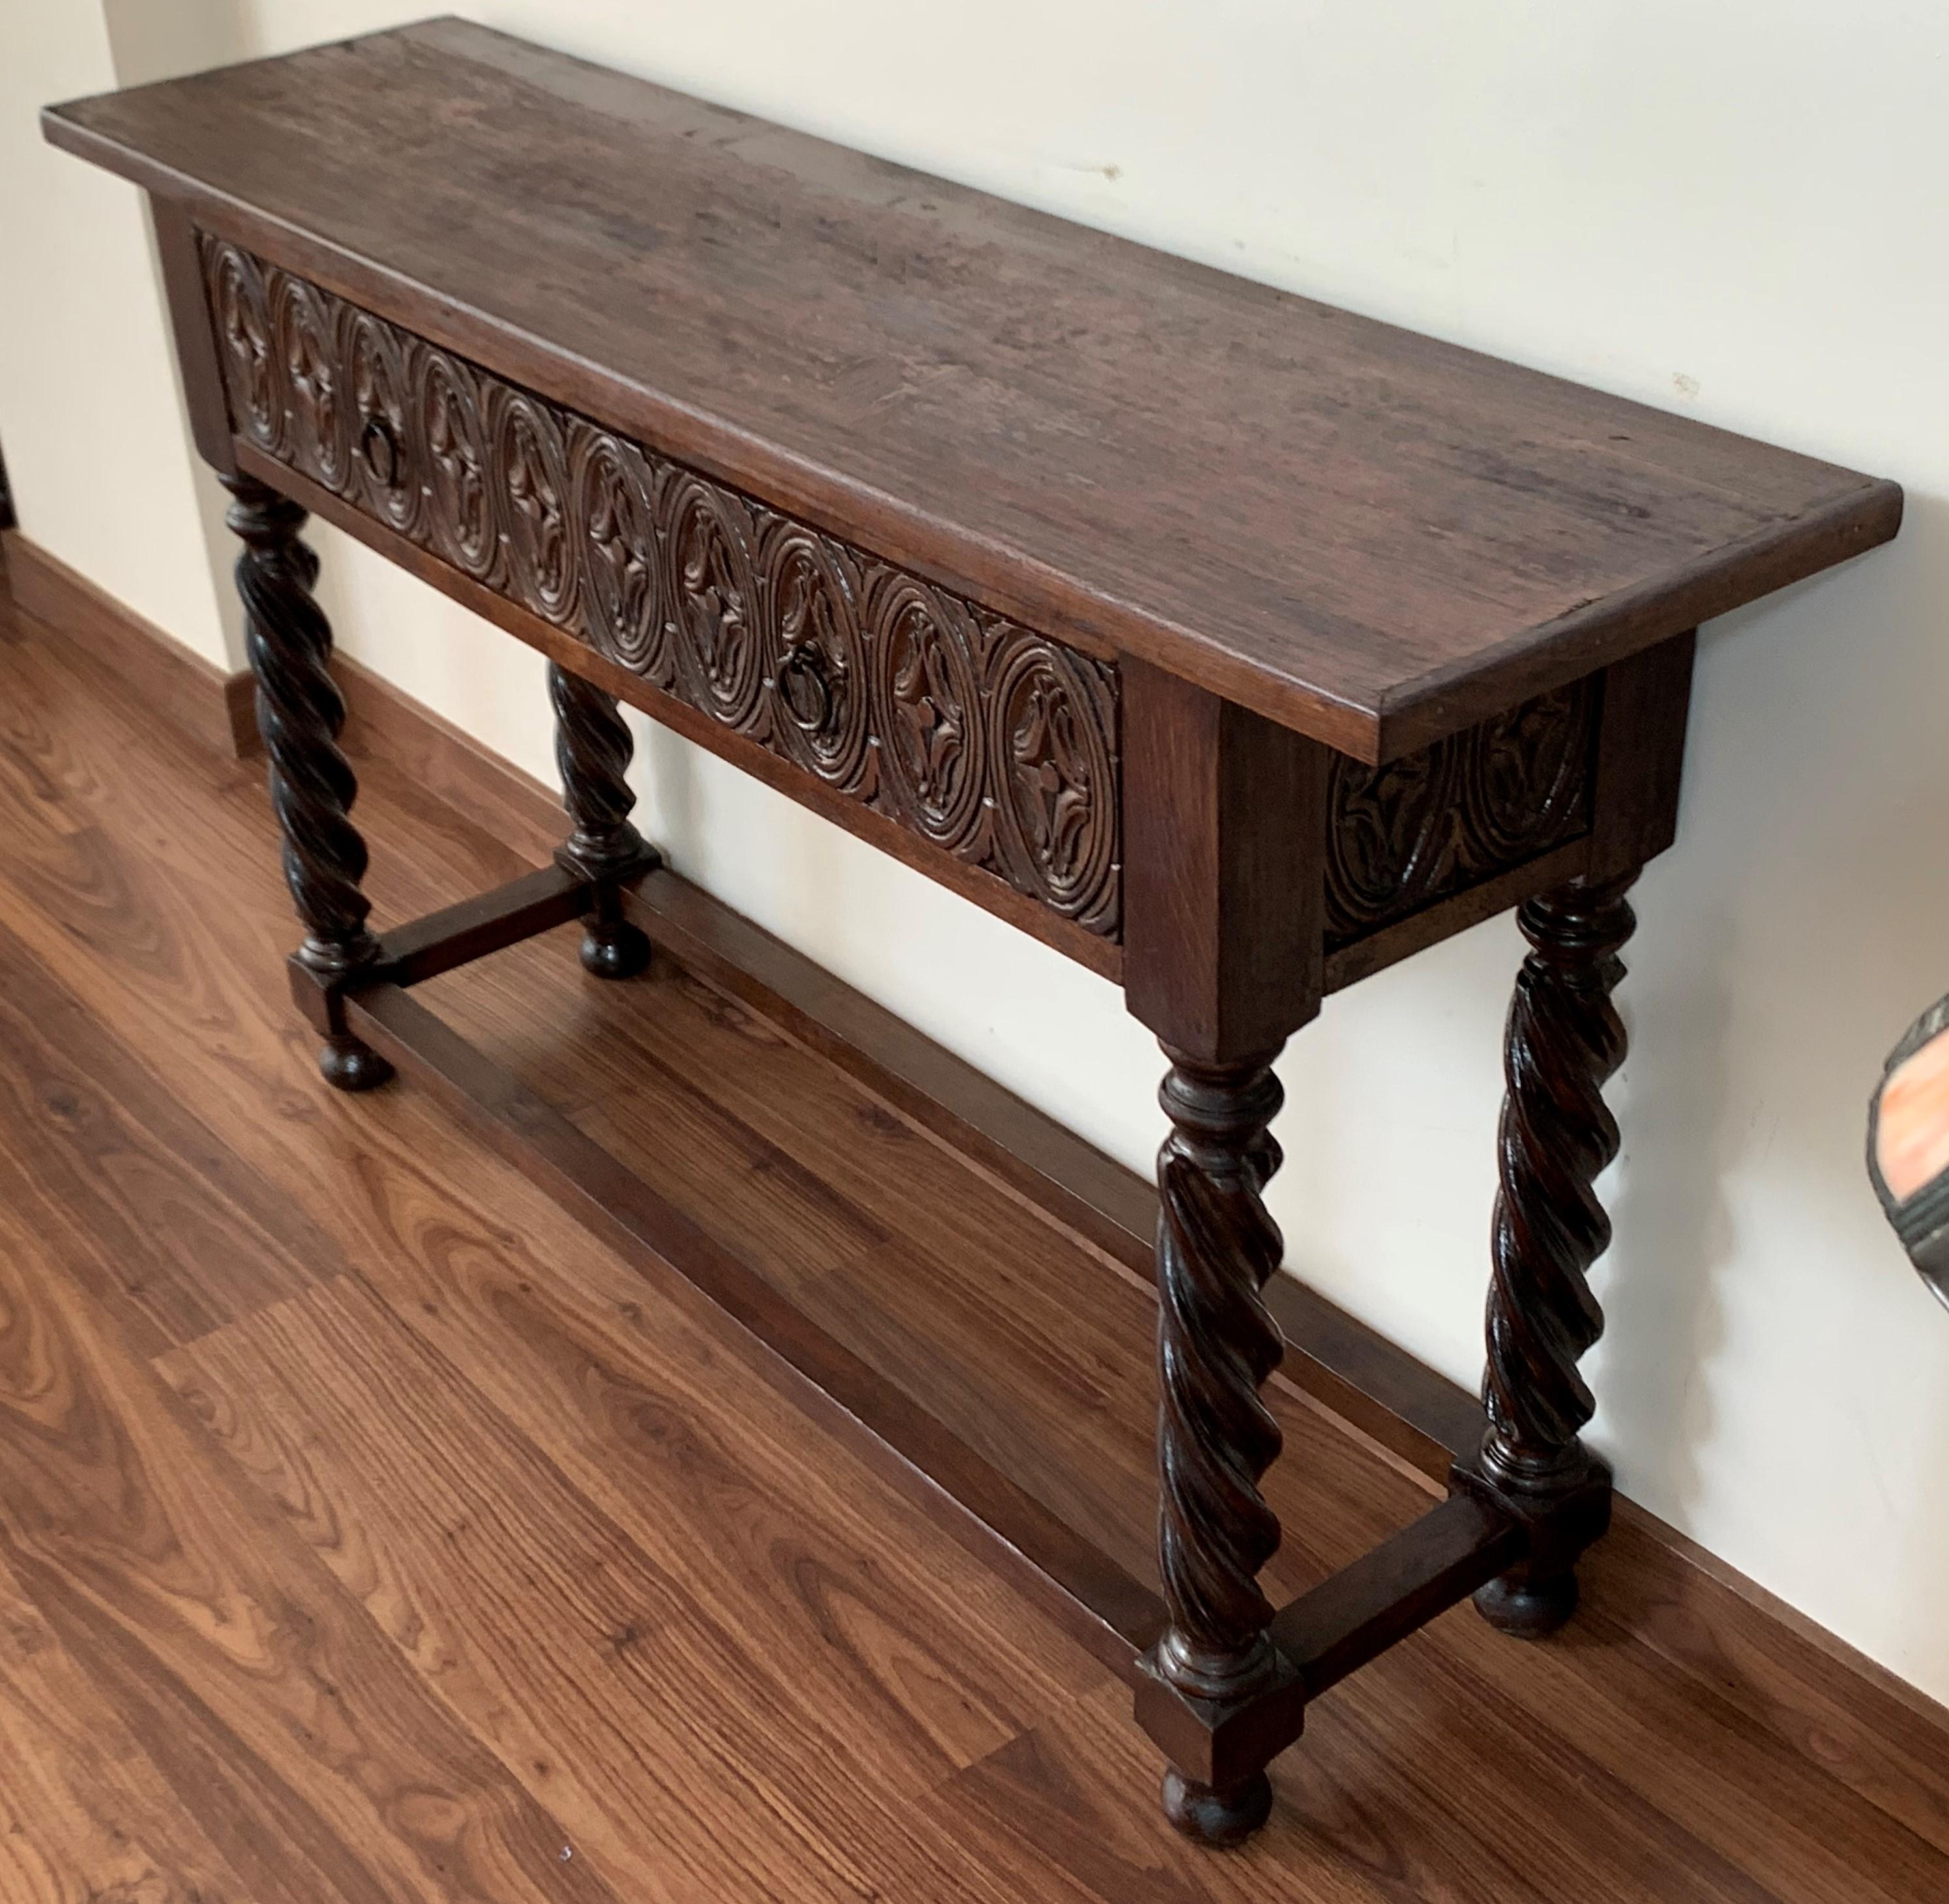 18th Carved Two-Drawer Baroque Spanish Walnut Console Table with Iron Hardware 1